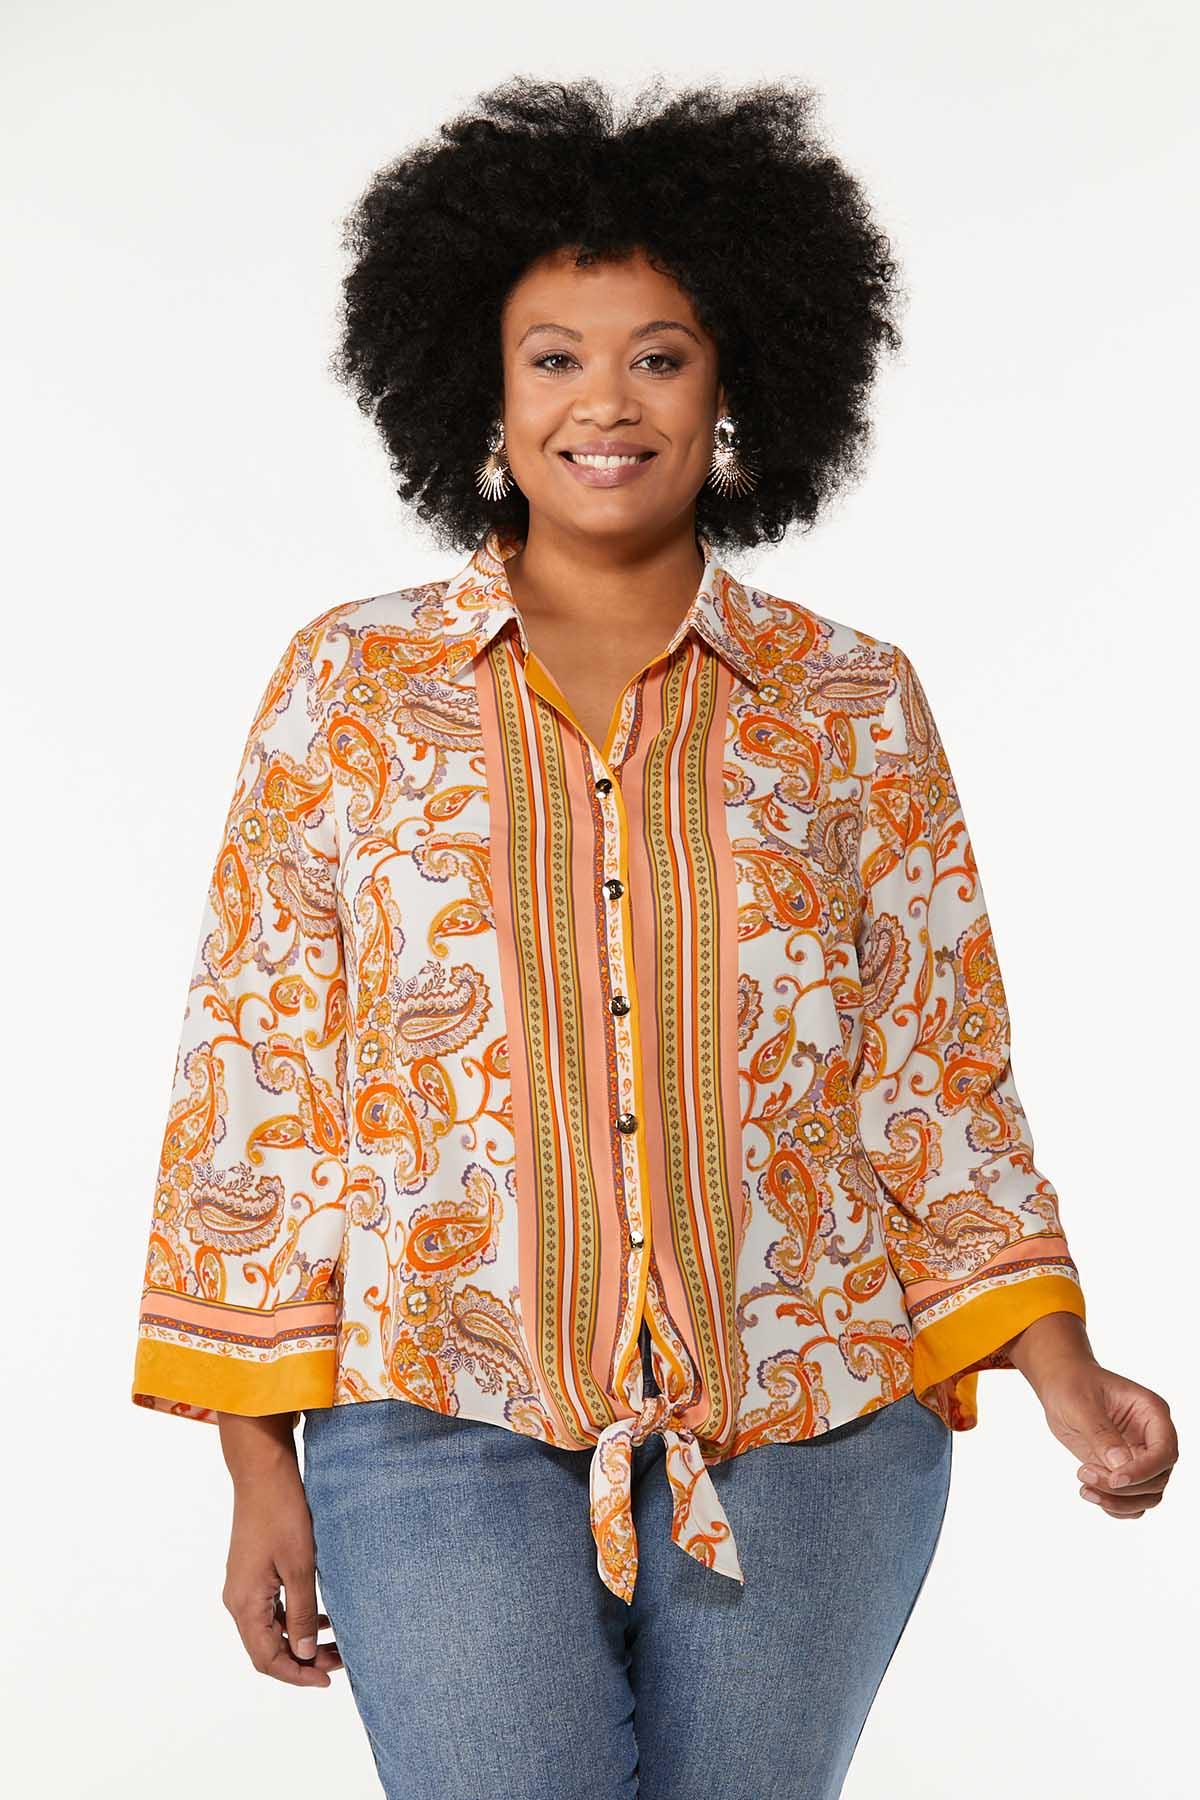 Frø Forskellige ego Plus Size Vintage Mixed Print Top Shirts & Blouses Cato Fashions